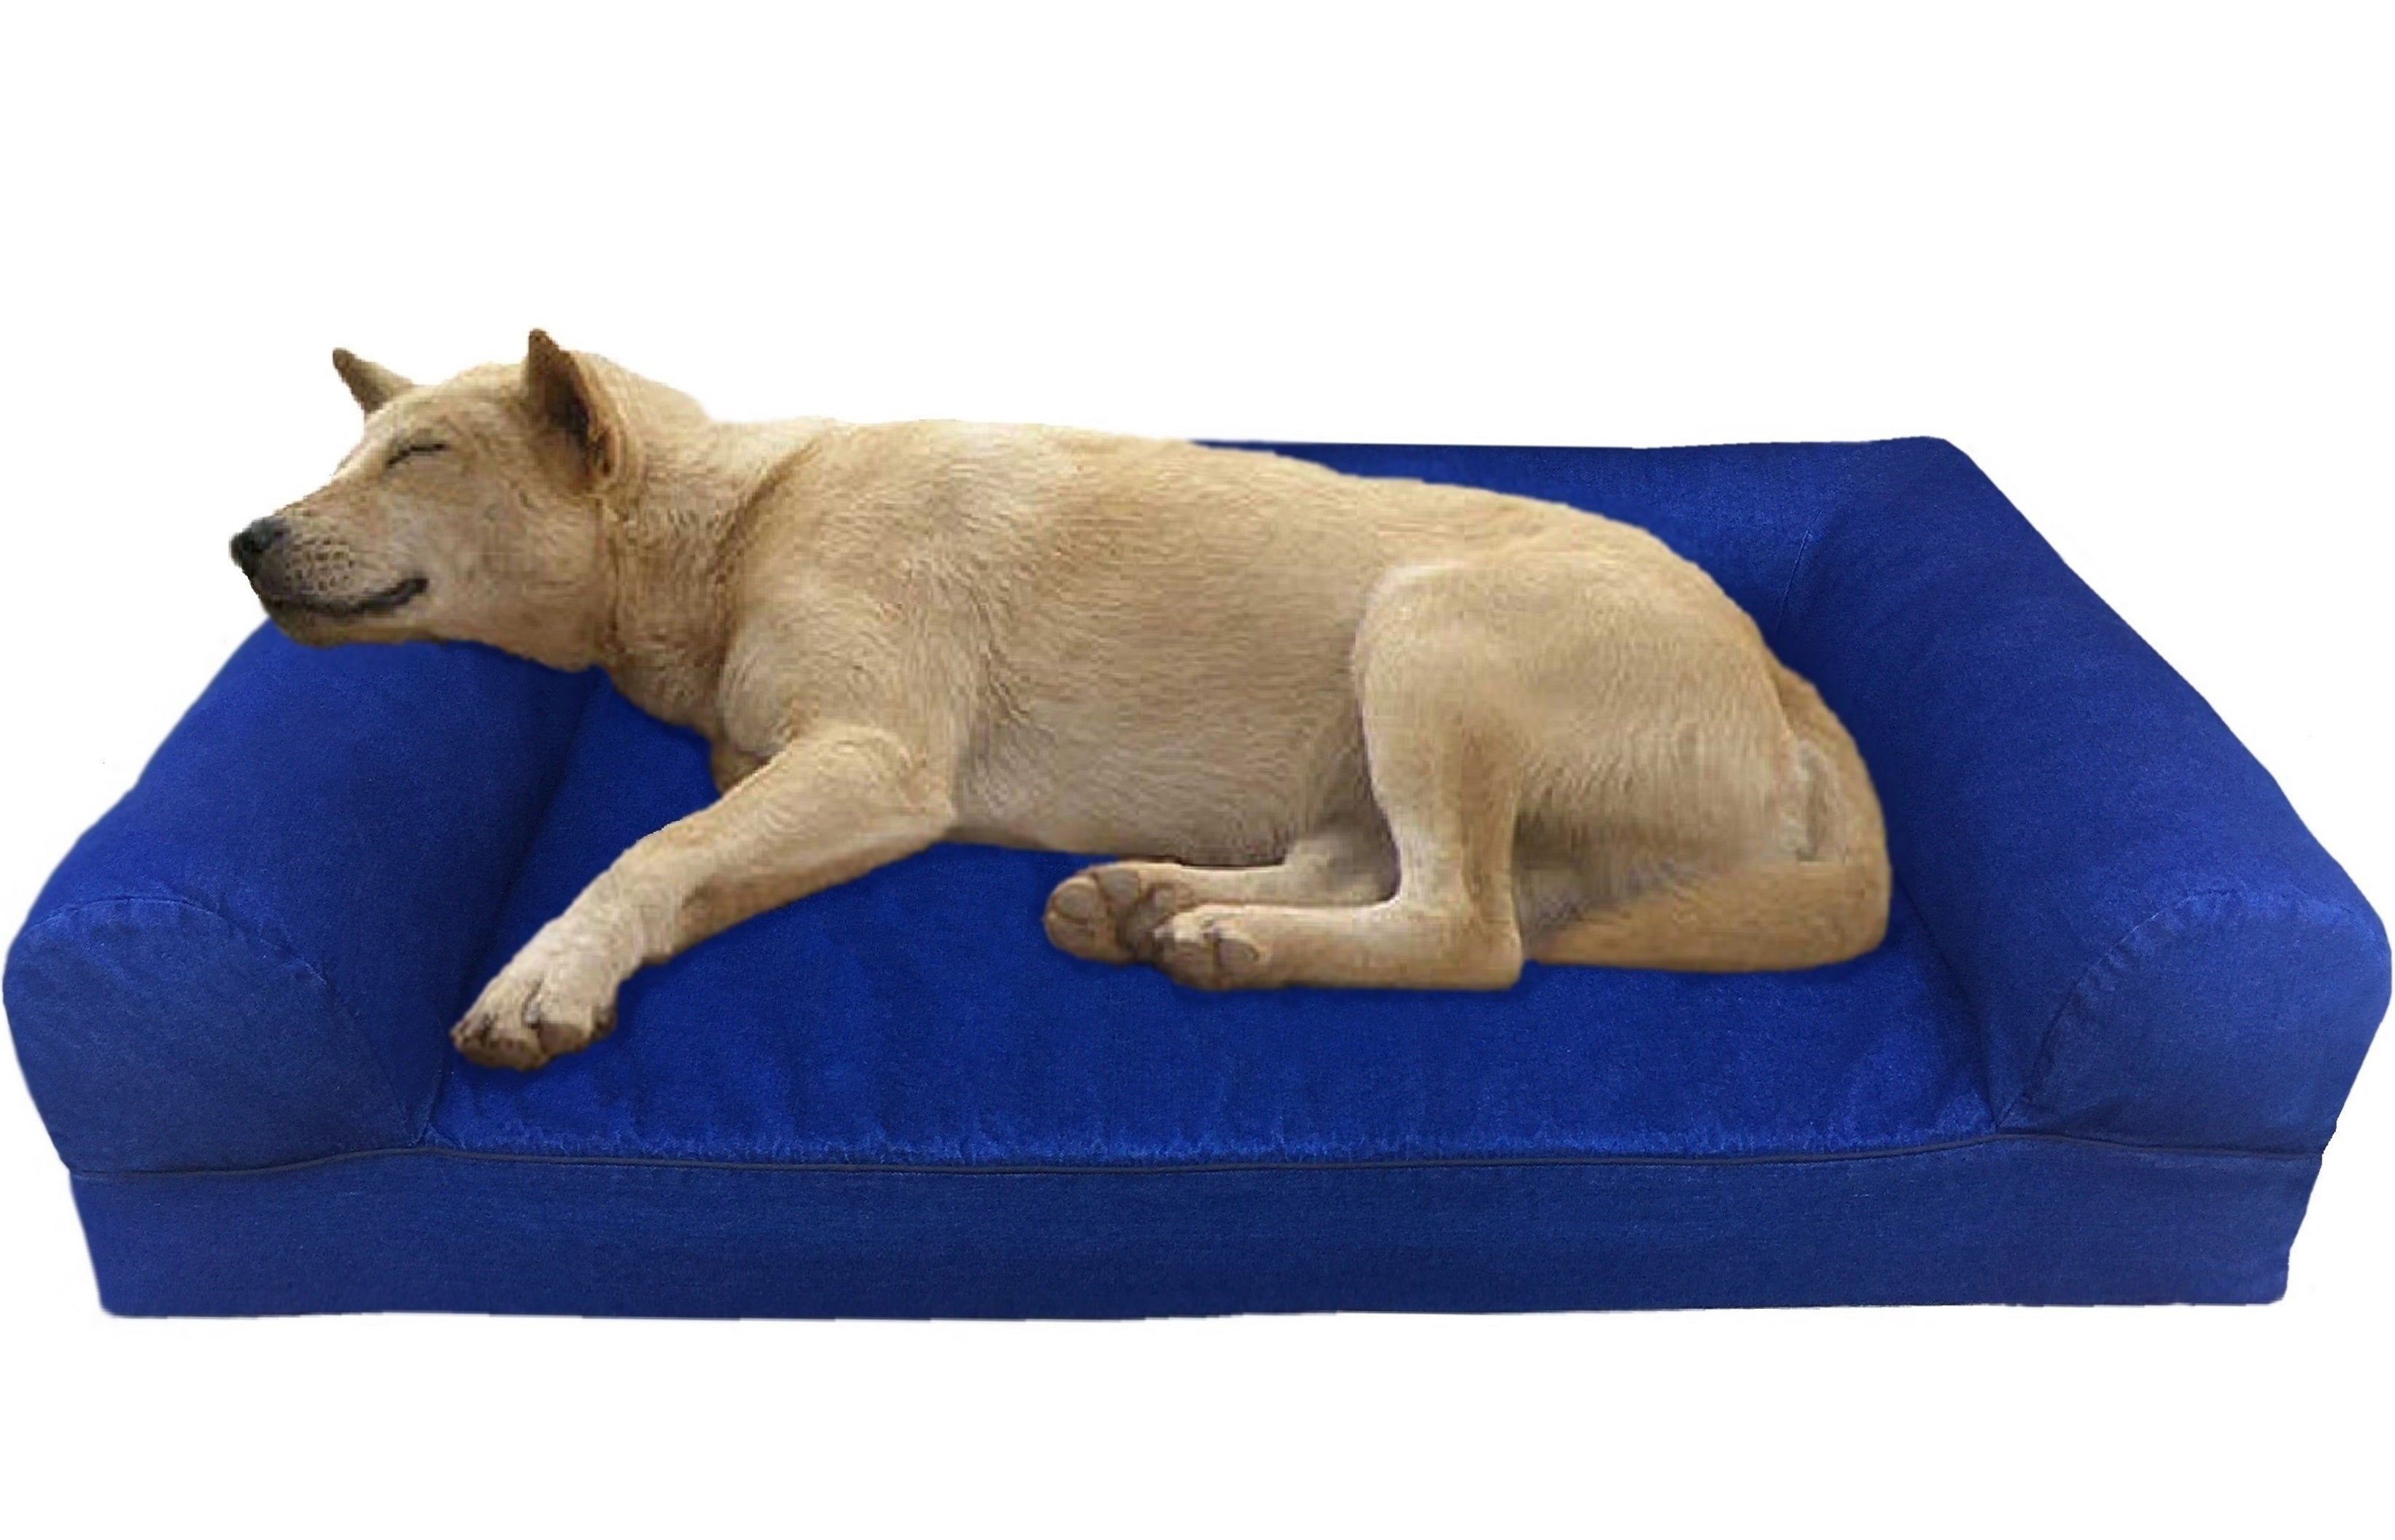 Dogbed4less Premium Heavy Duty Gel Cooling Memory Foam Pad Dog Bed